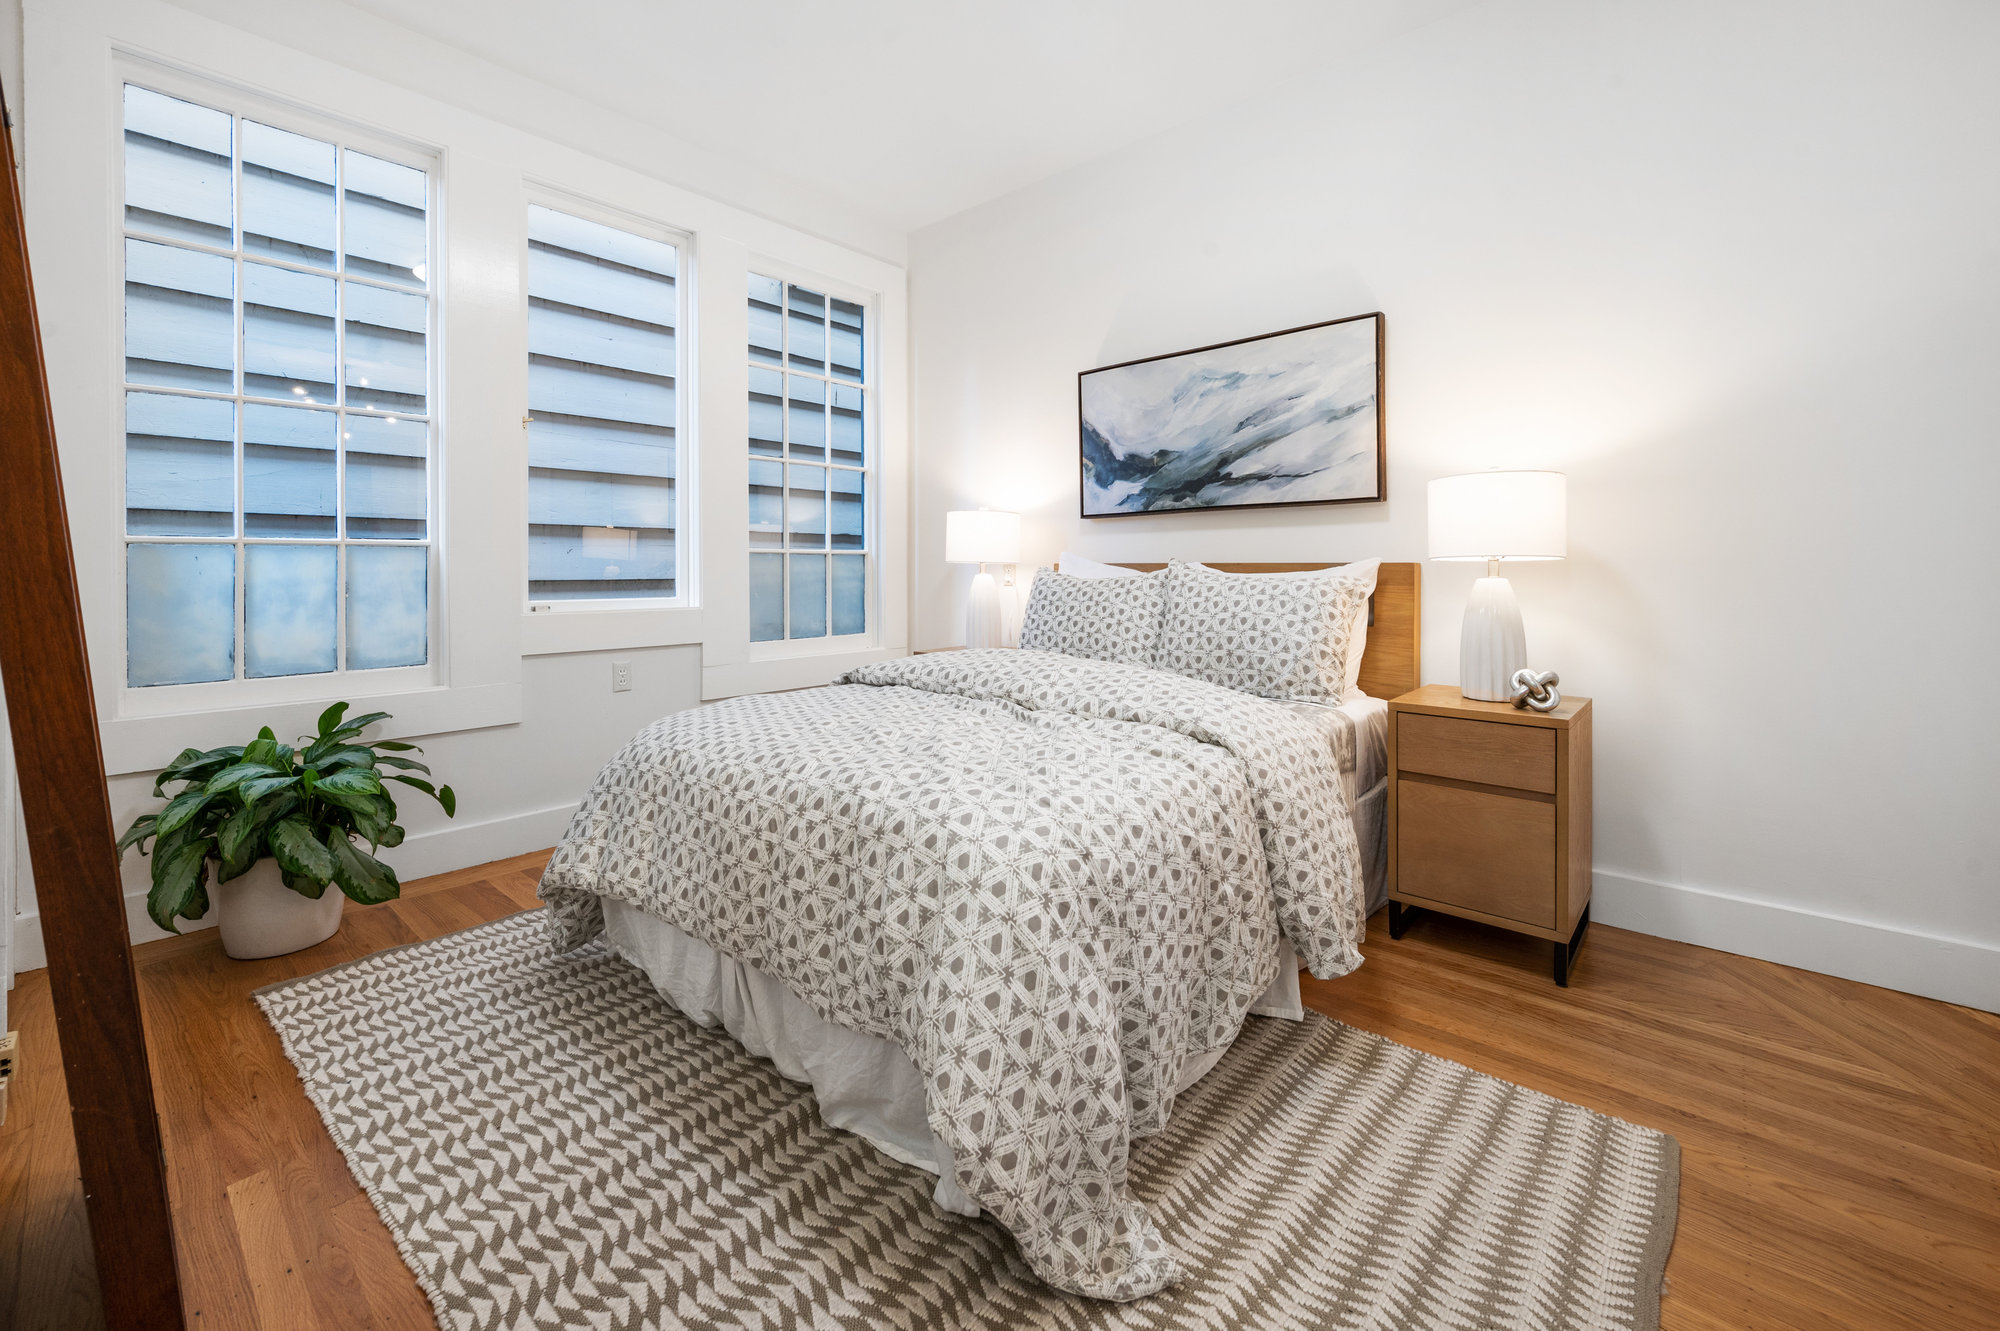 Property Photo: Bedroom four, featuring wood floors and large windows